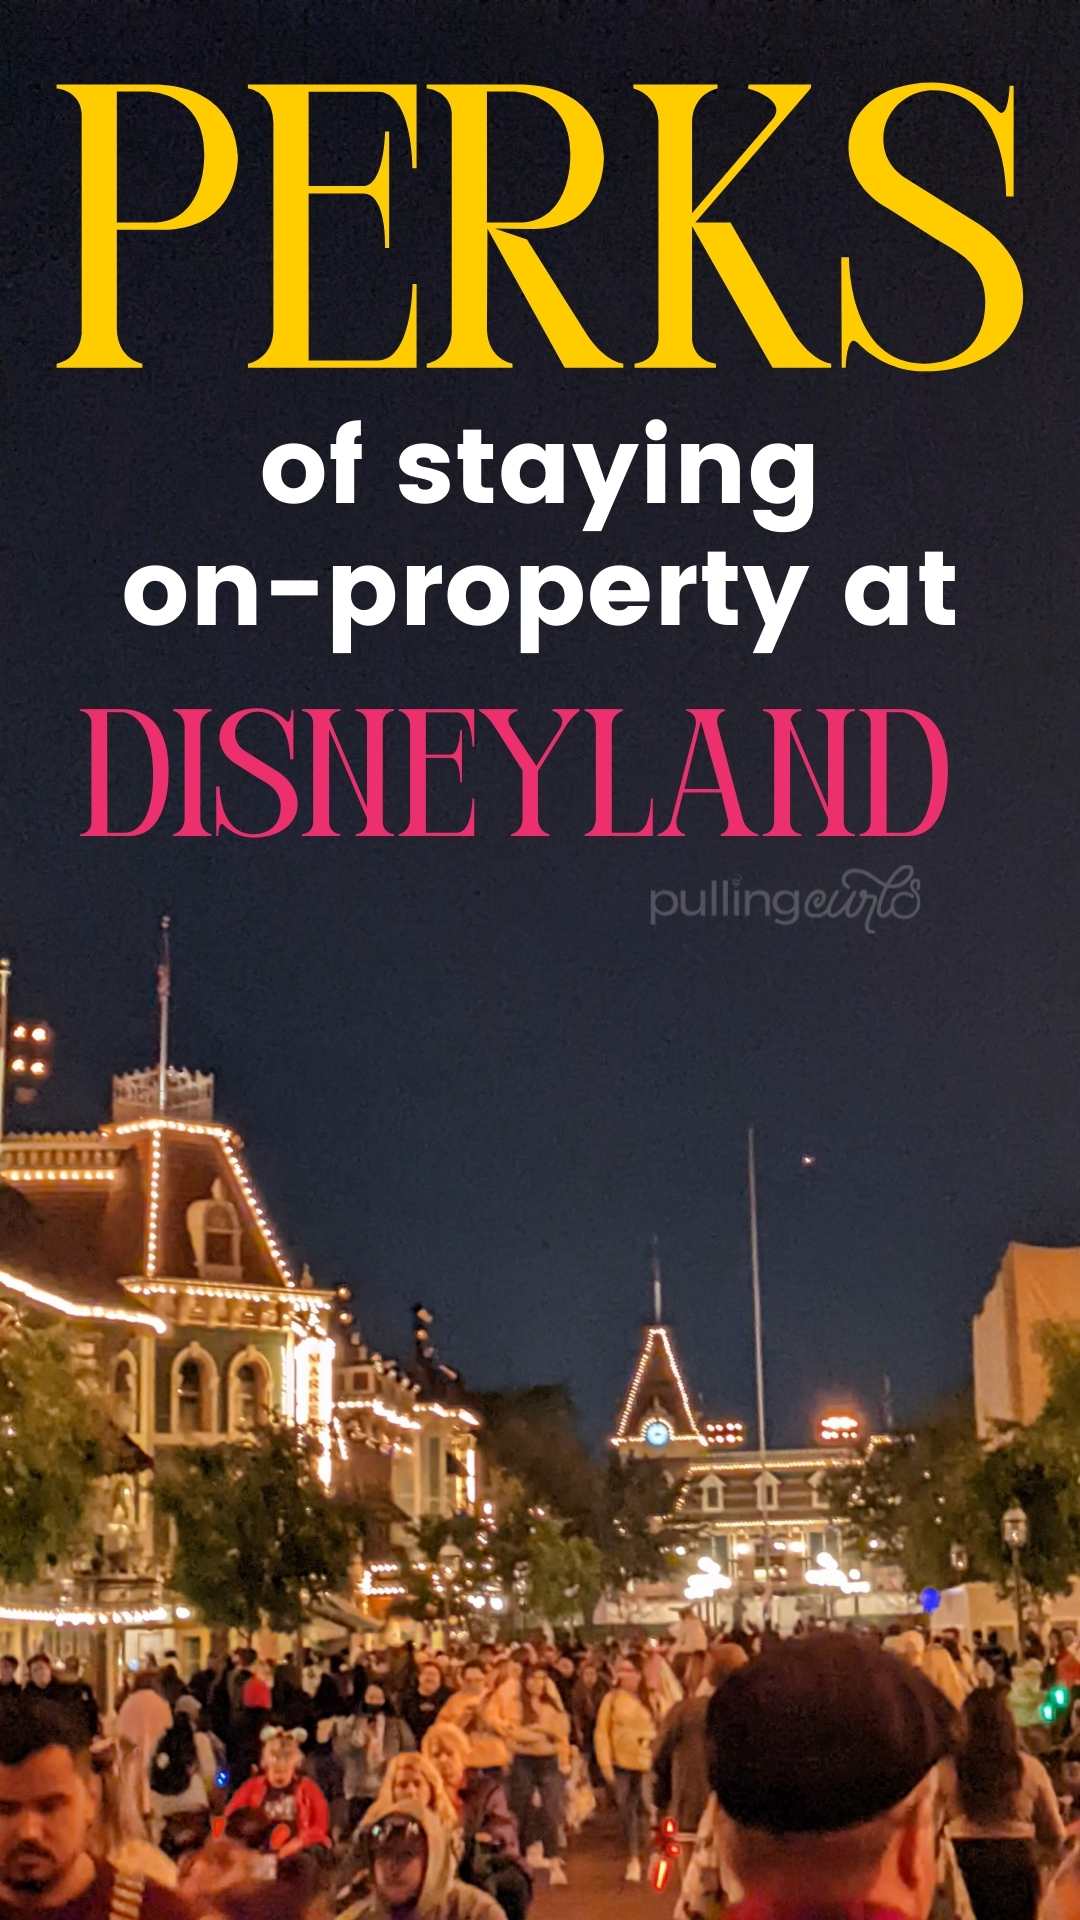 You might already know there are three Disneyland Resort Hotels, but do you know all the perks of staying at one of them? Honestly, guys, I've never stayed in a park hotel. SO, I asked my friends at Get Away Today to share the benefits of staying at a one of the hotels of the Disneyland Resort, so you can see why it’s worth it for your next vacation. via @pullingcurls